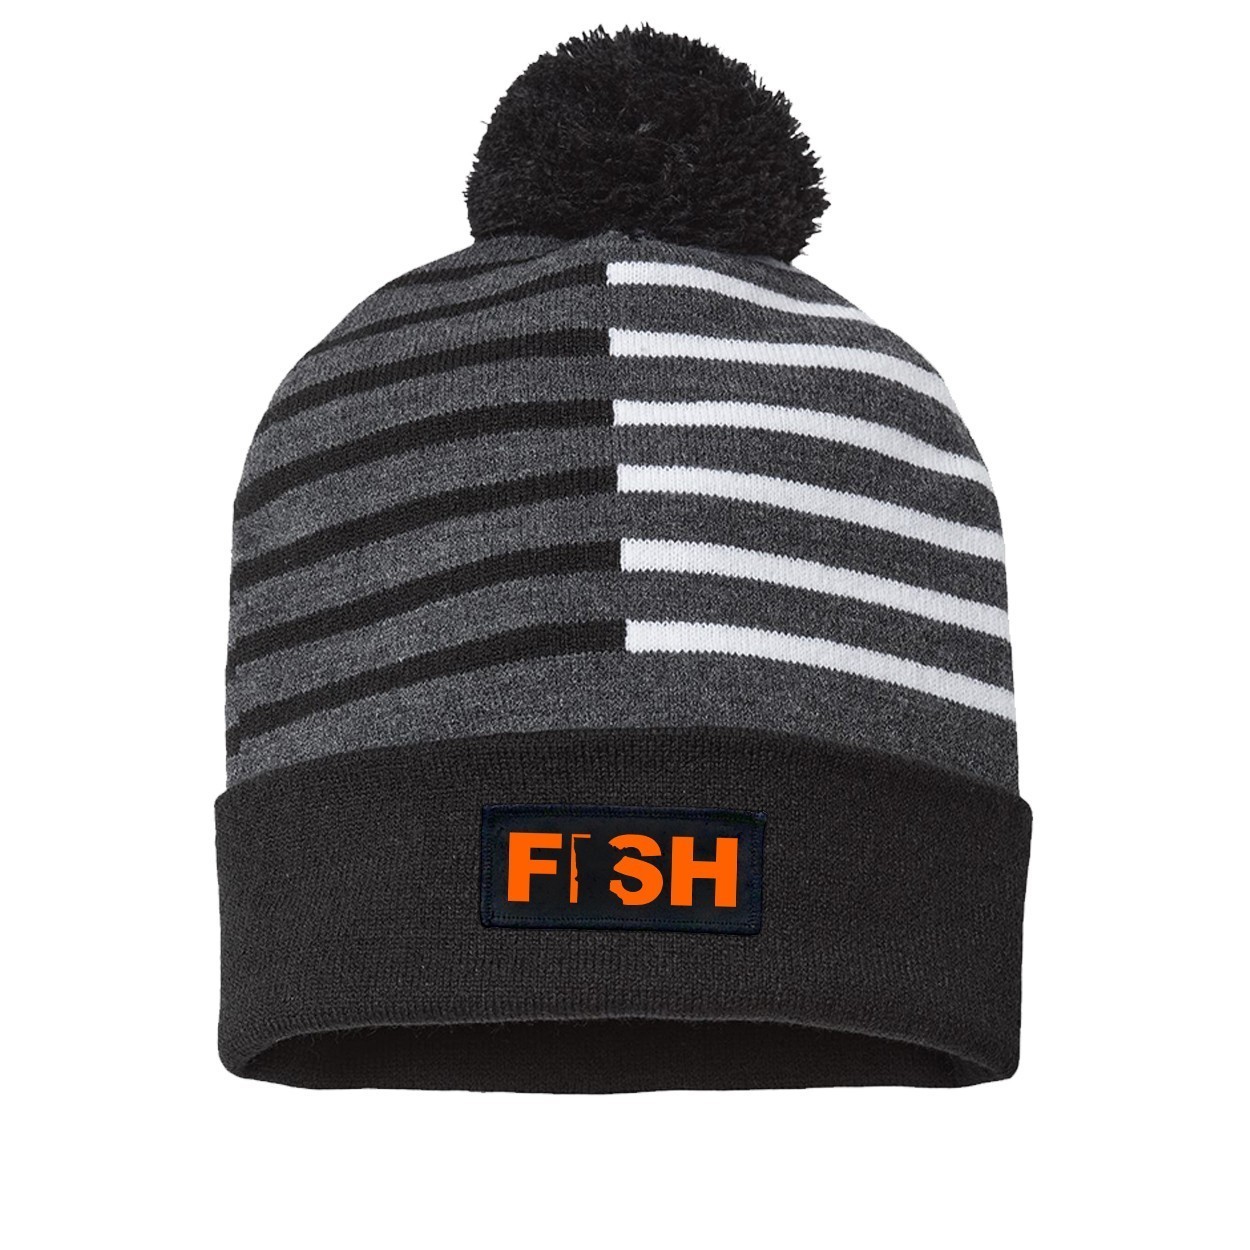 Fish Minnesota Night Out Woven Patch Roll Up Pom Knit Beanie Half Color Black/White (Orange Logo)